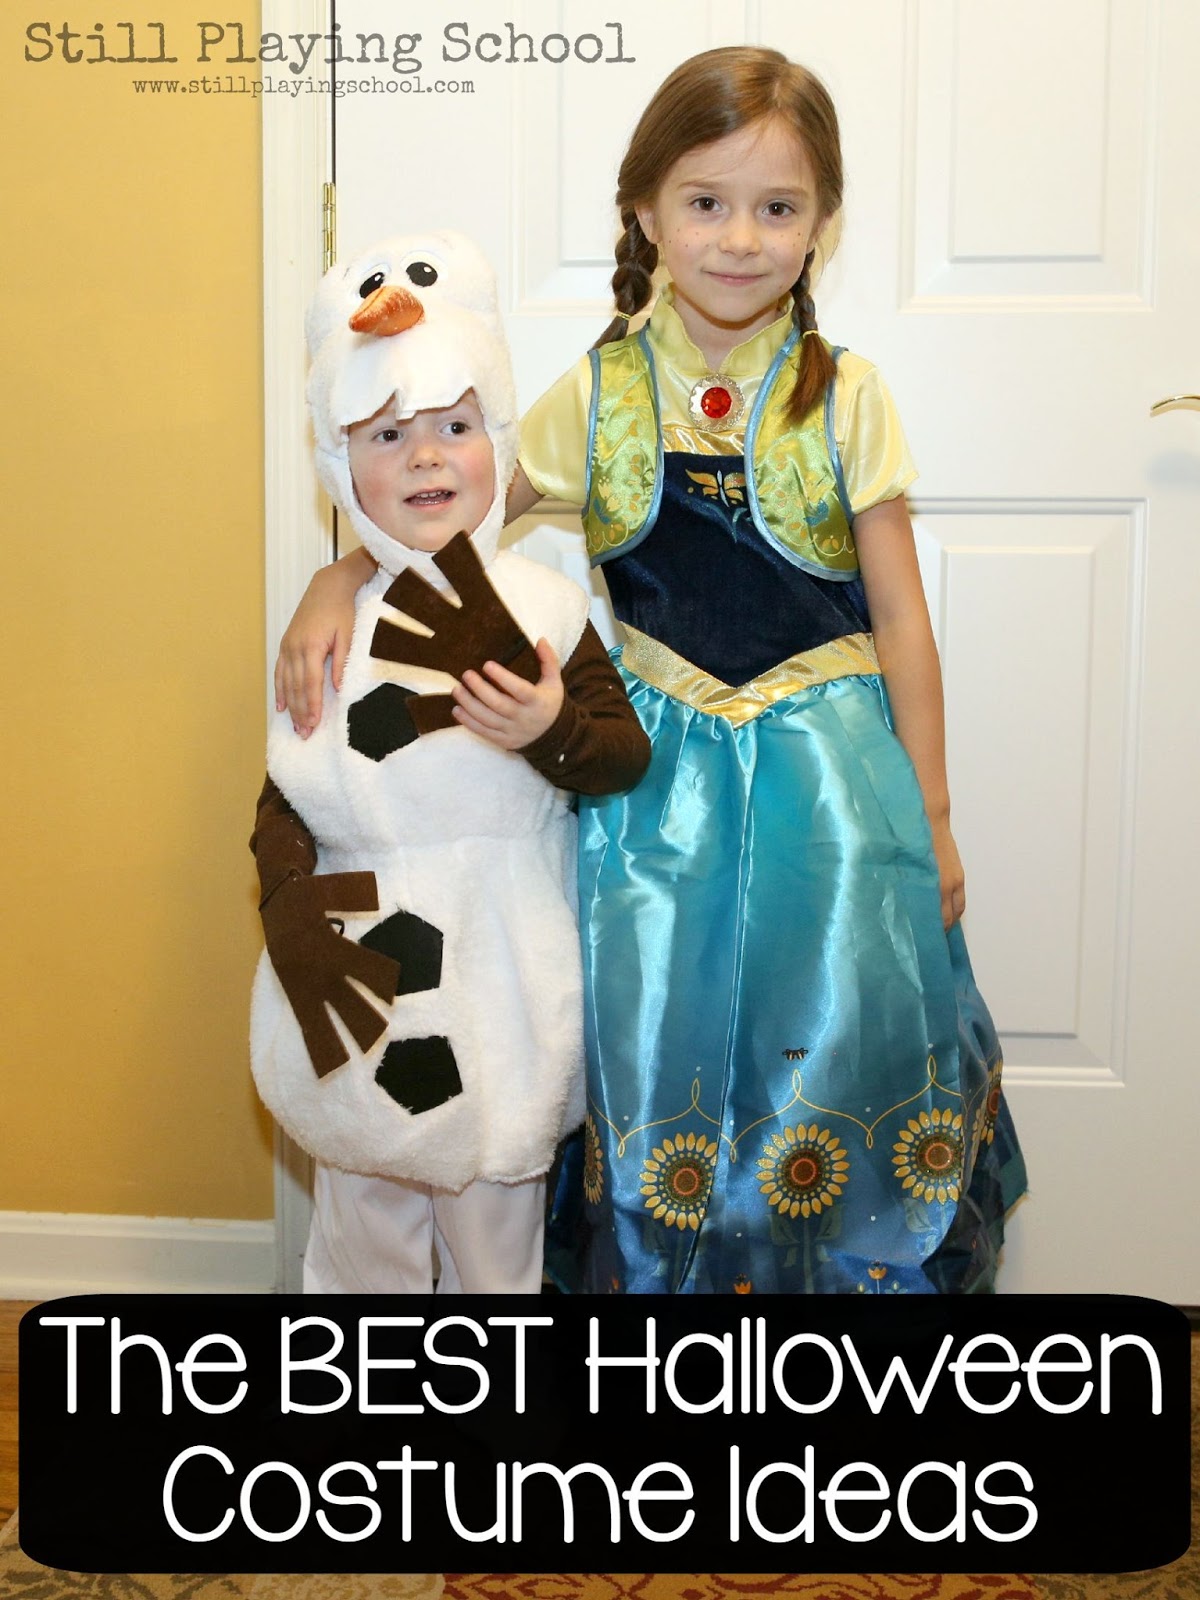 The Best Halloween Costume Ideas for Kids Still Playing School